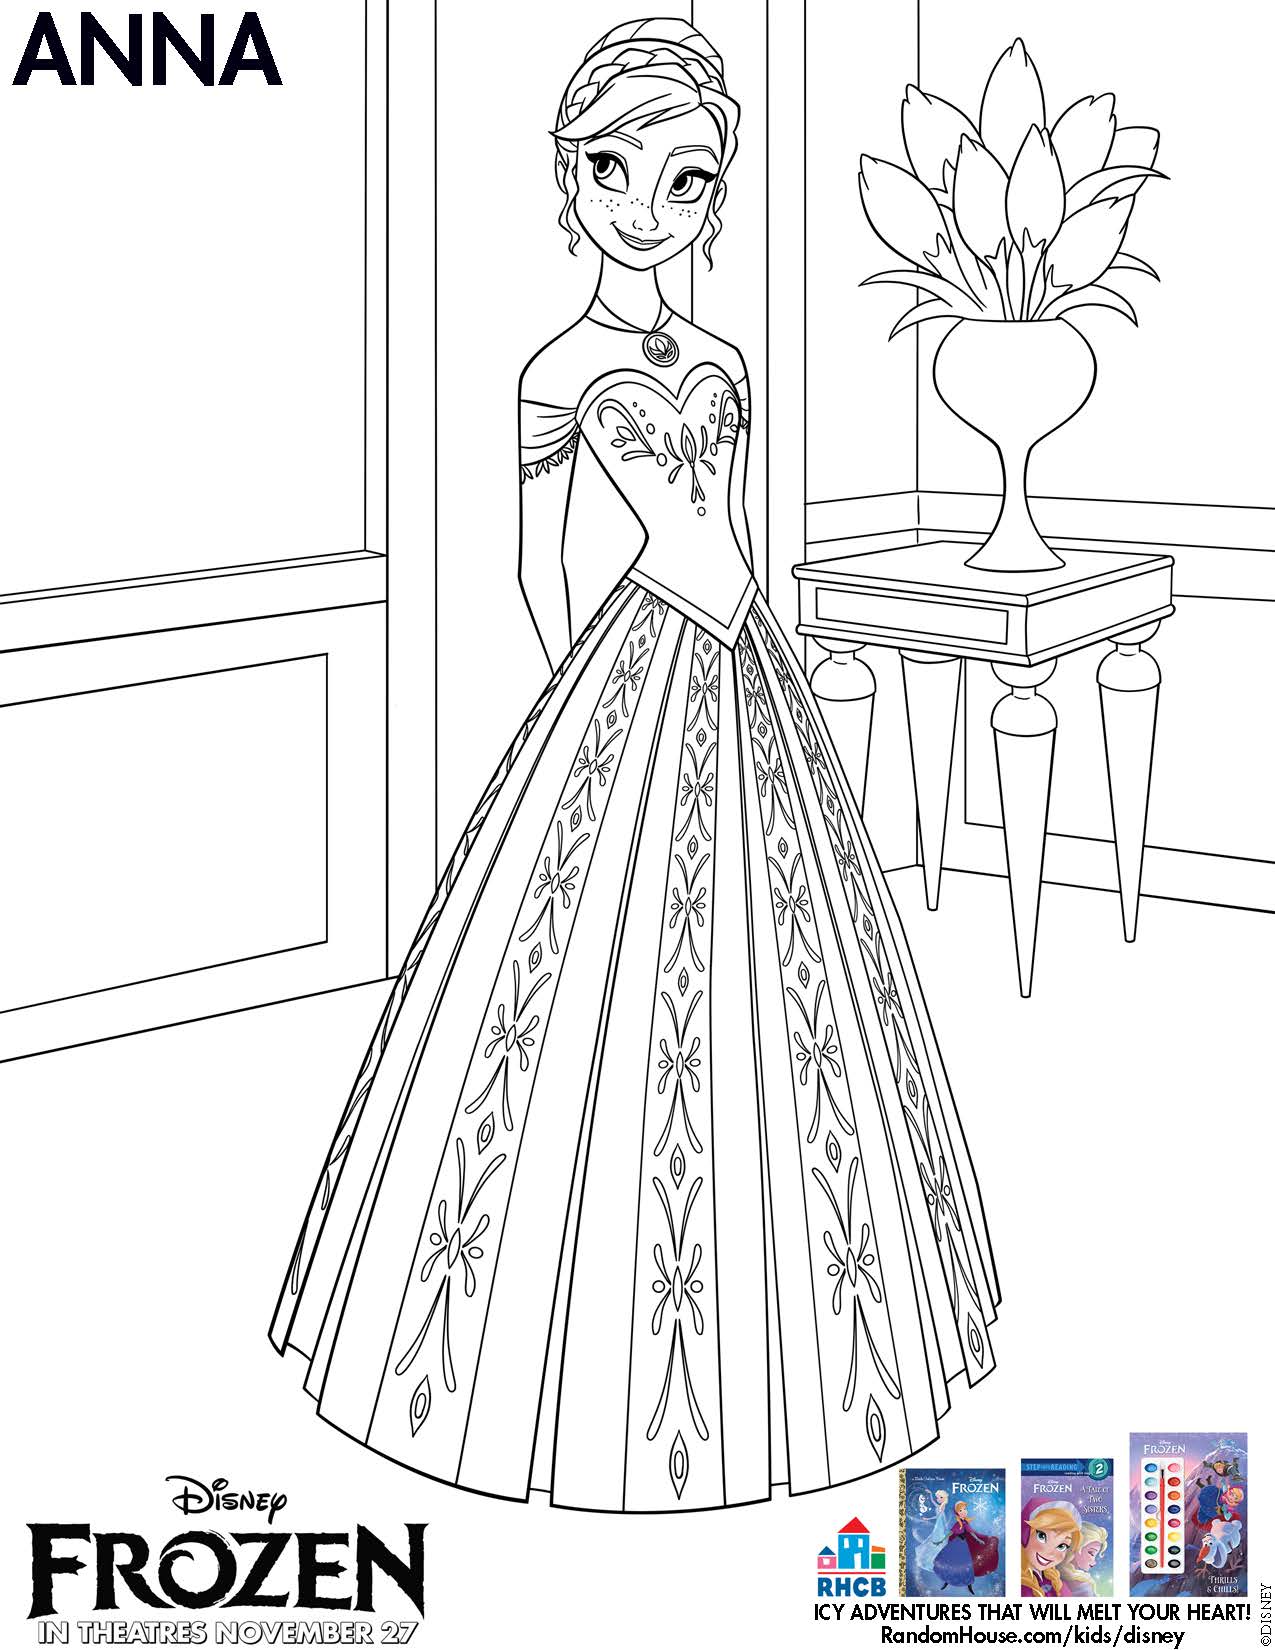 Movie: Disney Frozen activity page available for Download (Anna Coloring Page)